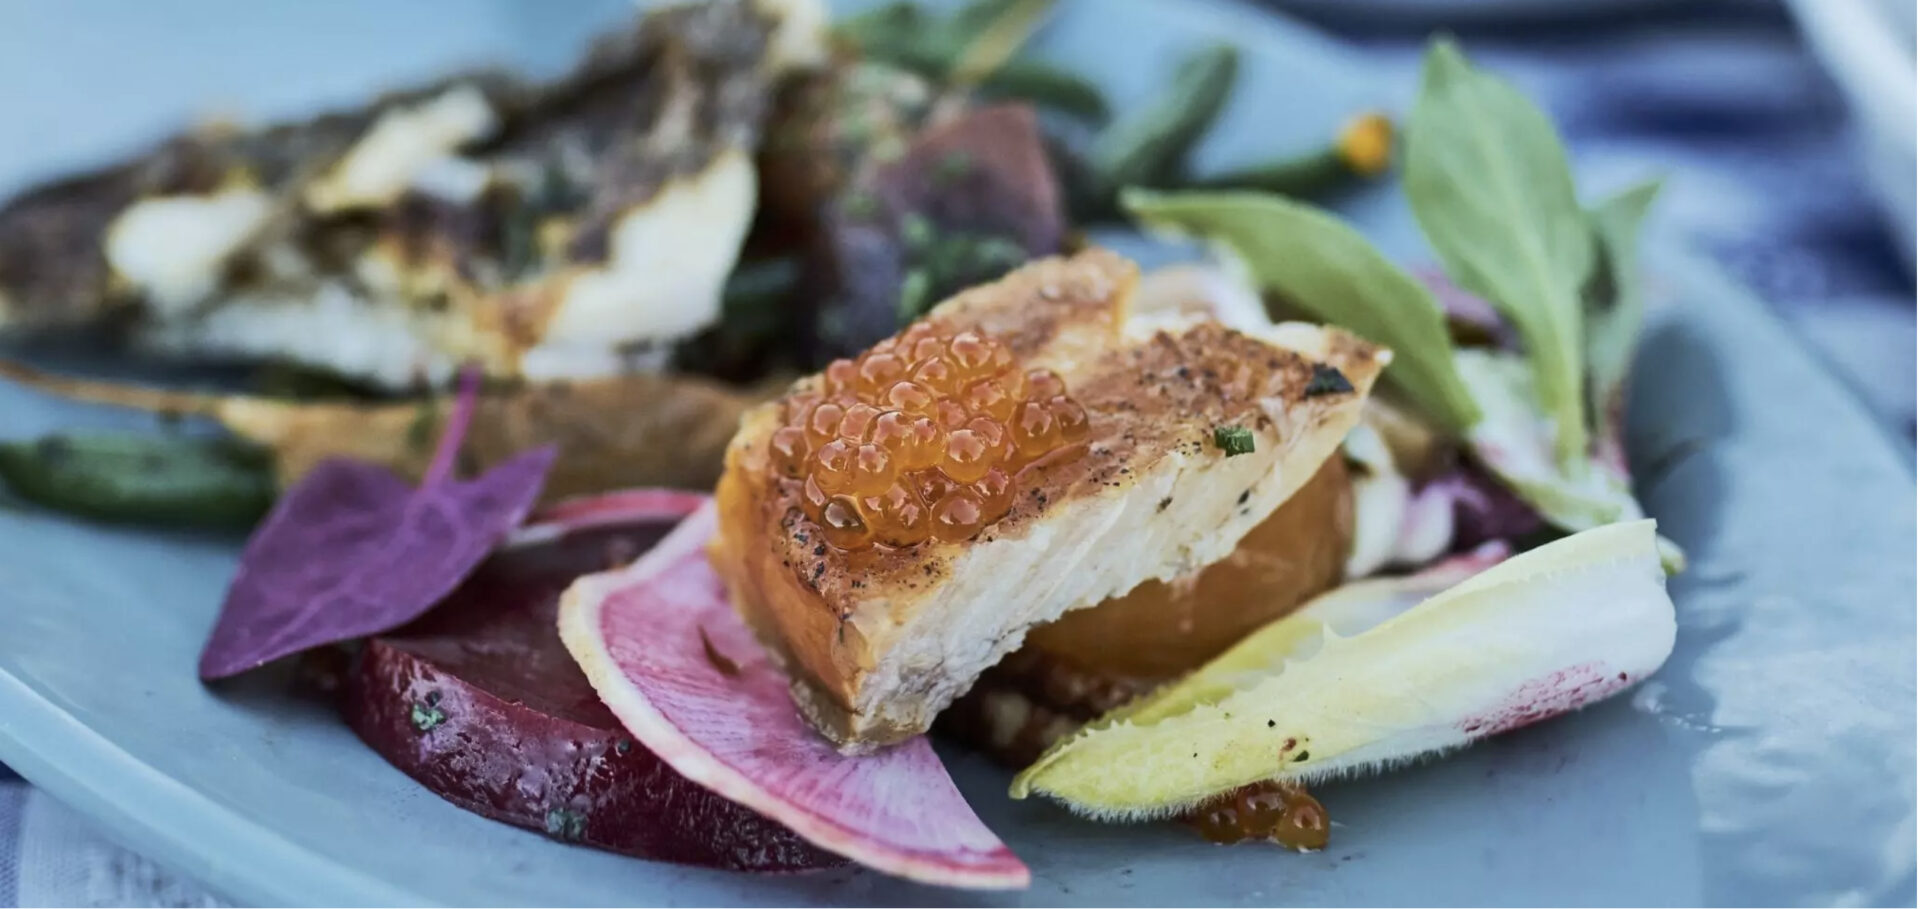 Roasted Trout and beet salad